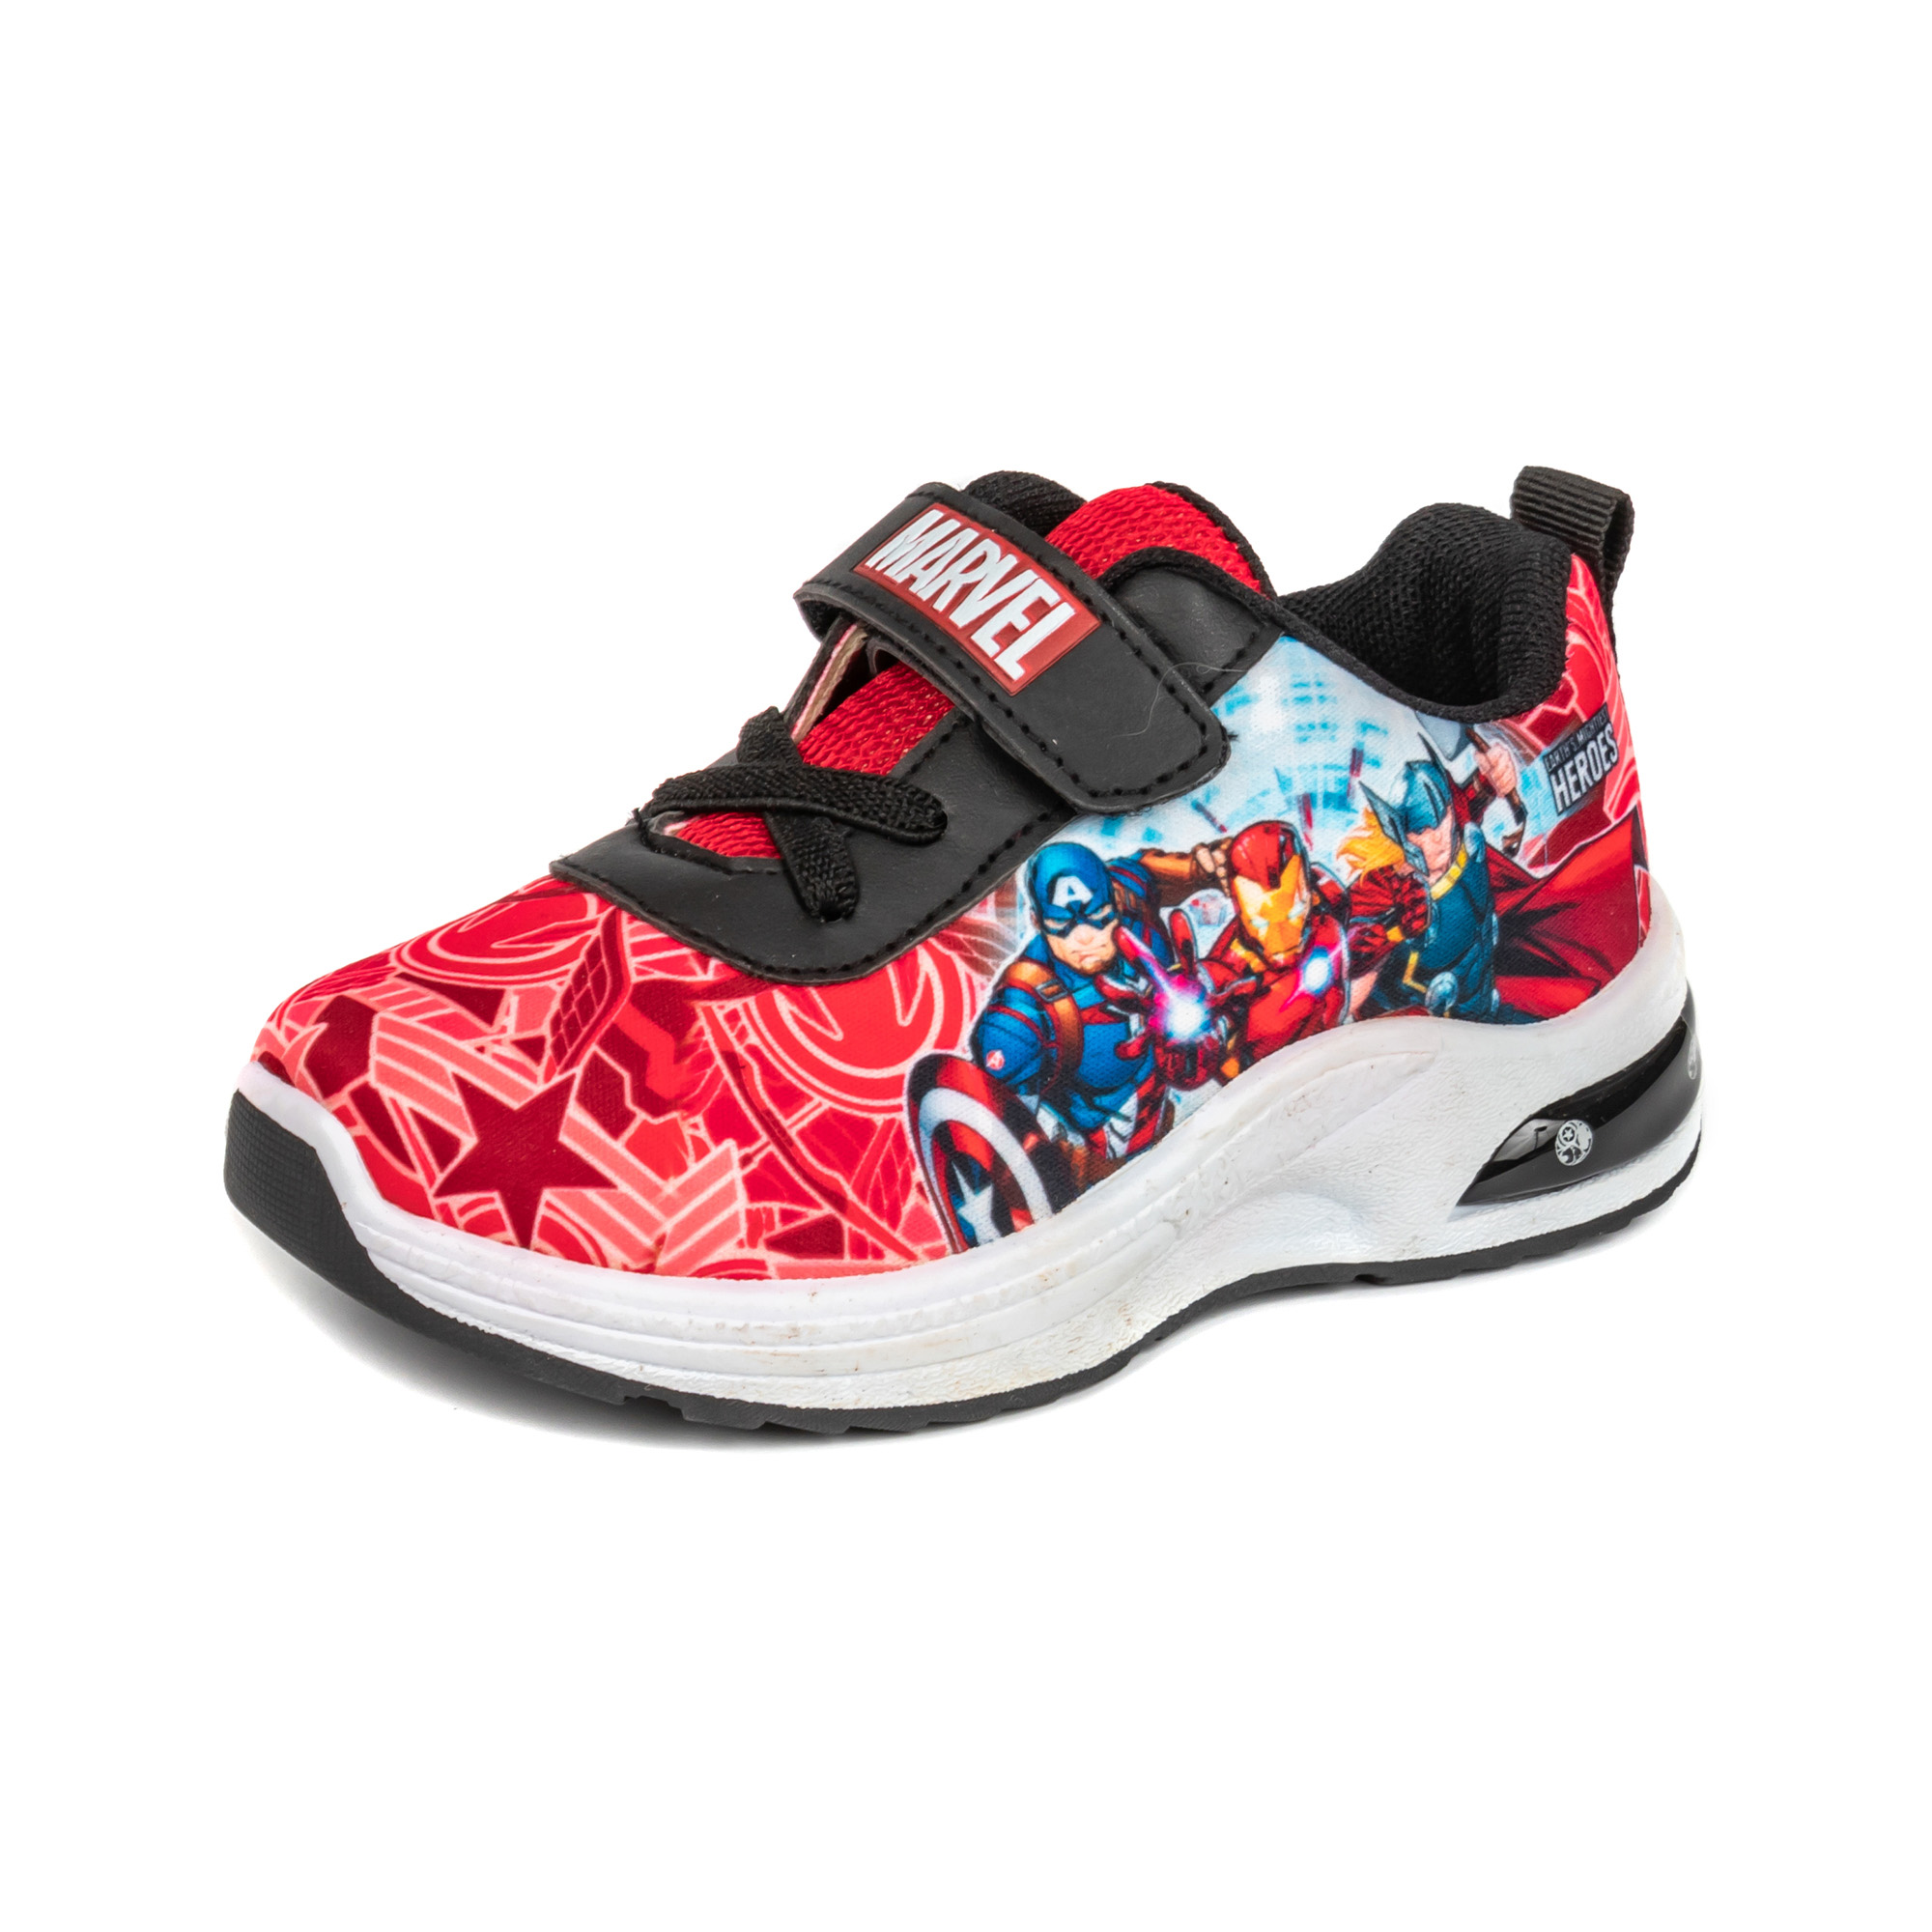 Sneaker Shoes, Children Shoes ,Injection shoes ,Red Textile with sublimation printing +Pu Upper, PVC injection Outsole